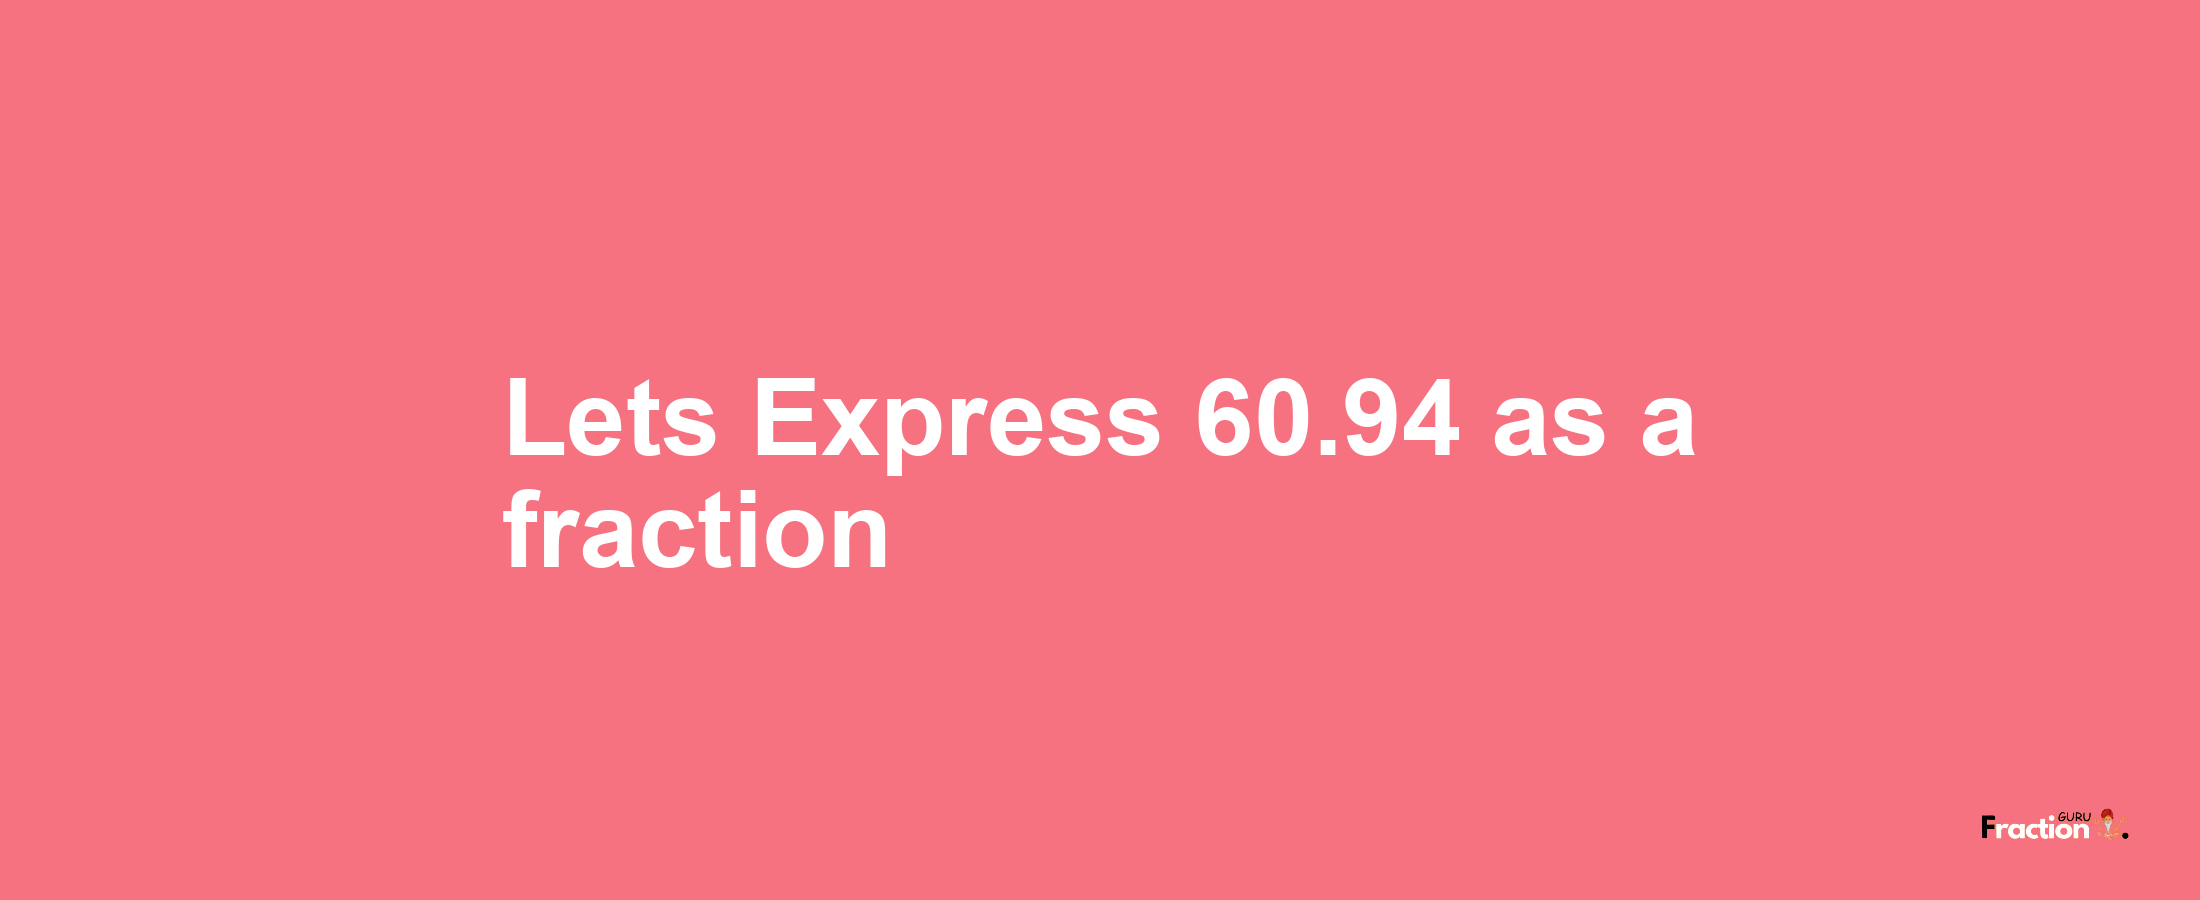 Lets Express 60.94 as afraction